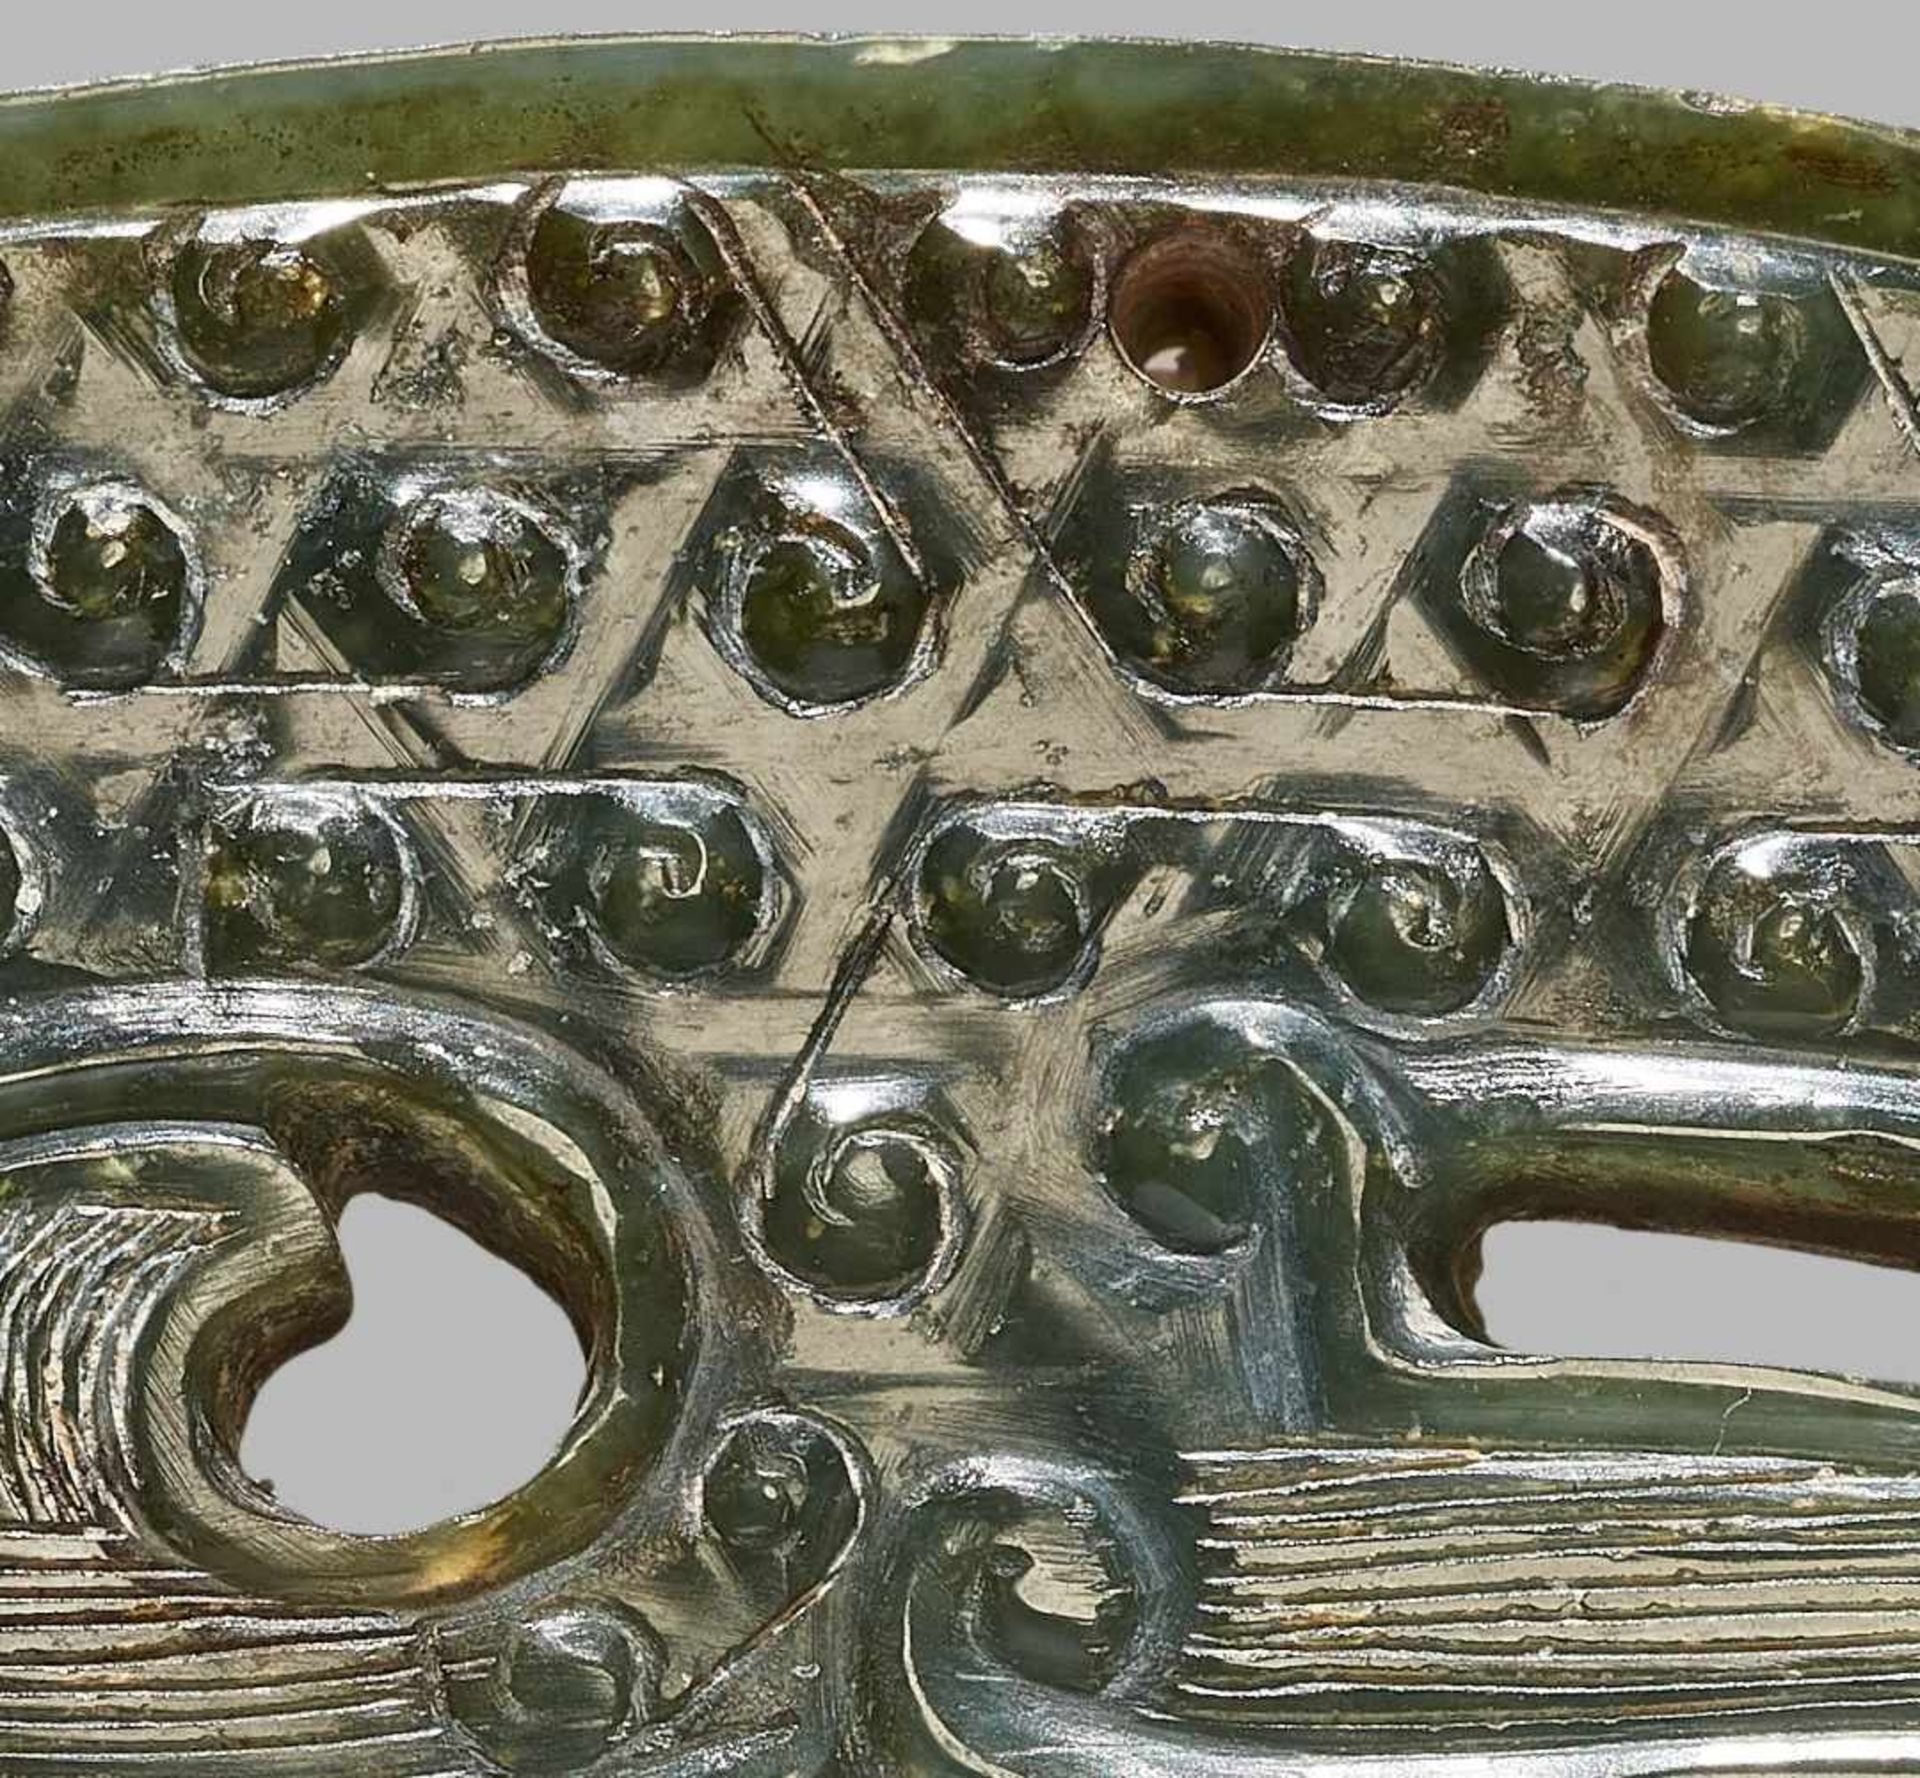 AN EXTREMELY RARE SPINACH GREEN JADE ARCHED DRAGON Jade, China. Eastern Zhou, Warring States period, - Image 5 of 6